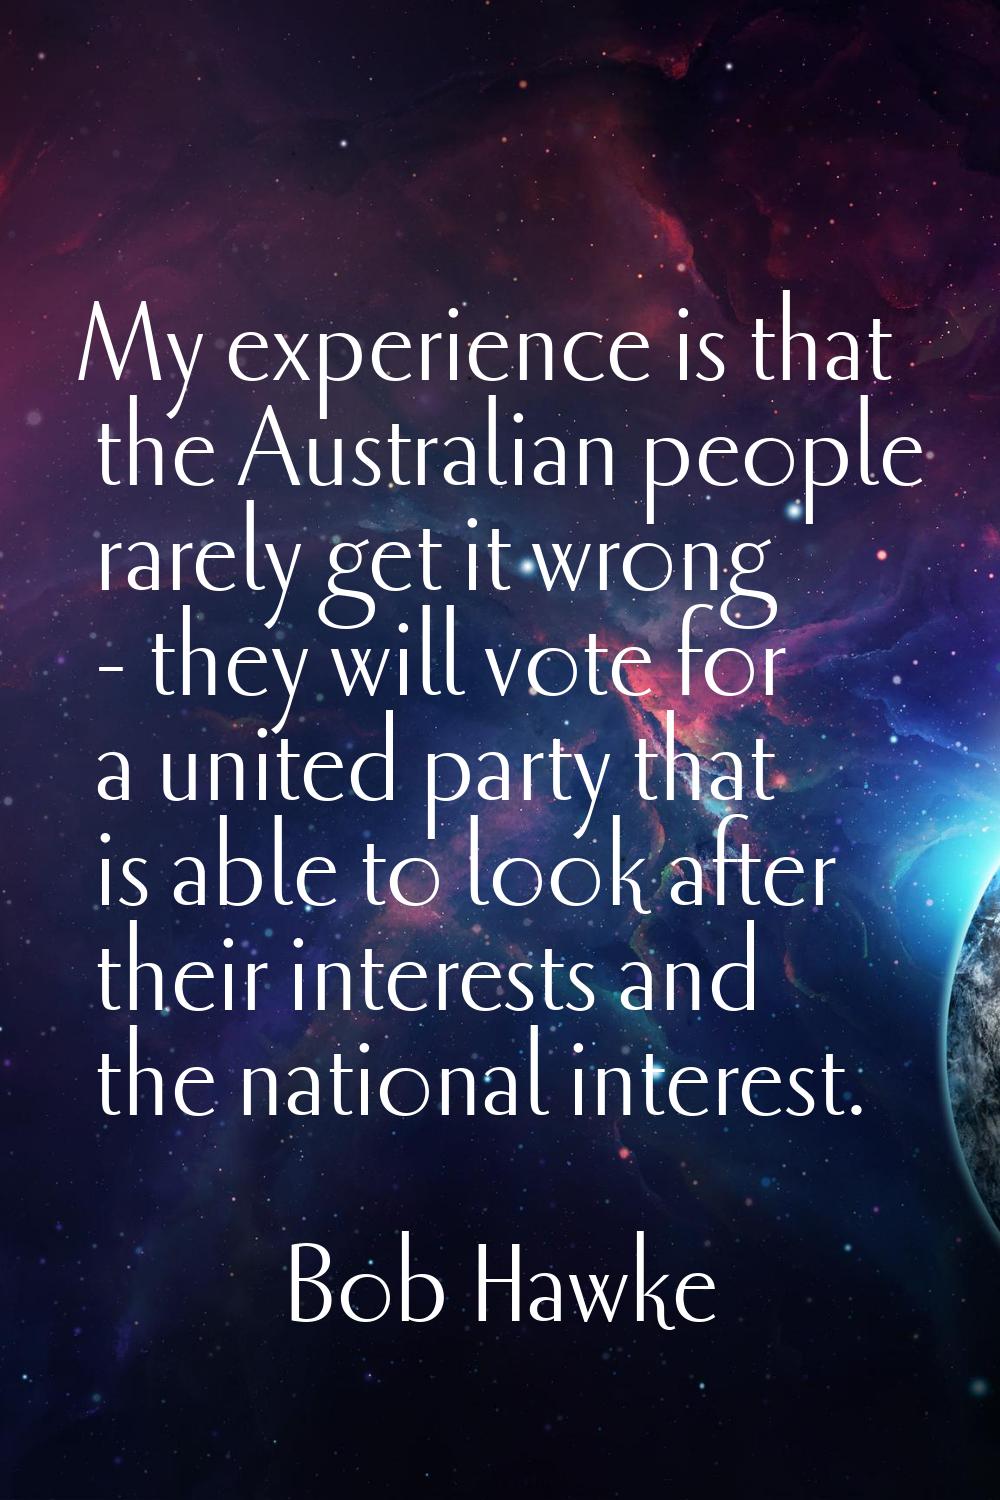 My experience is that the Australian people rarely get it wrong - they will vote for a united party